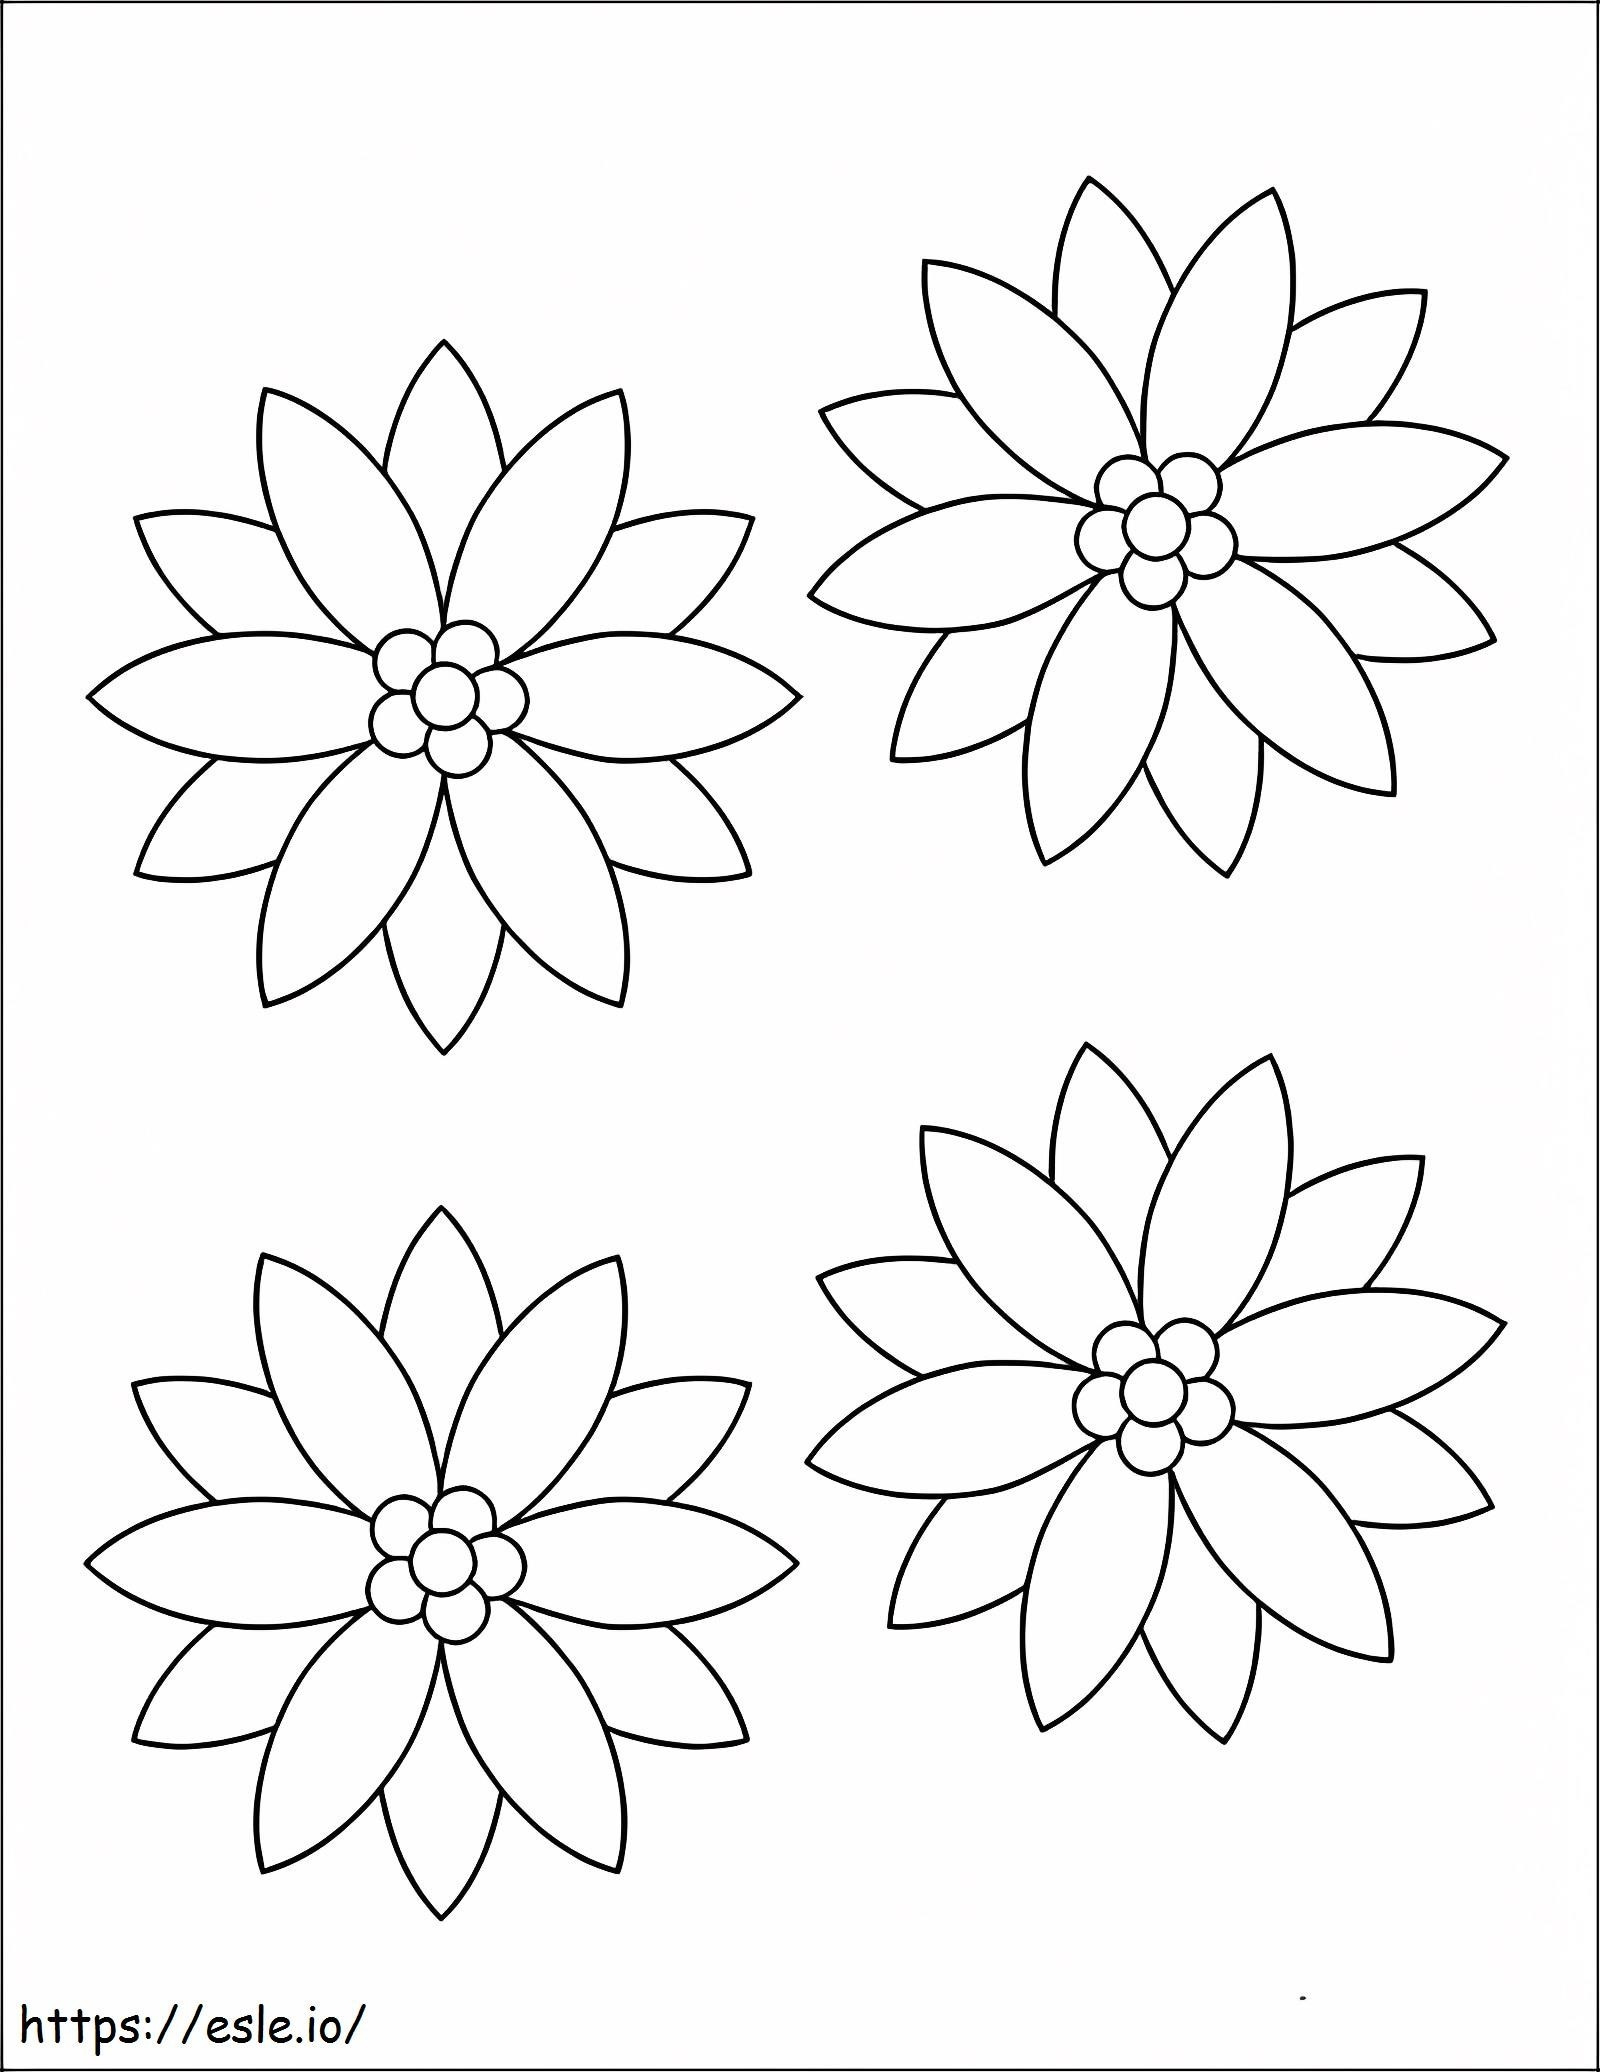 Four Flower Poinsettia coloring page